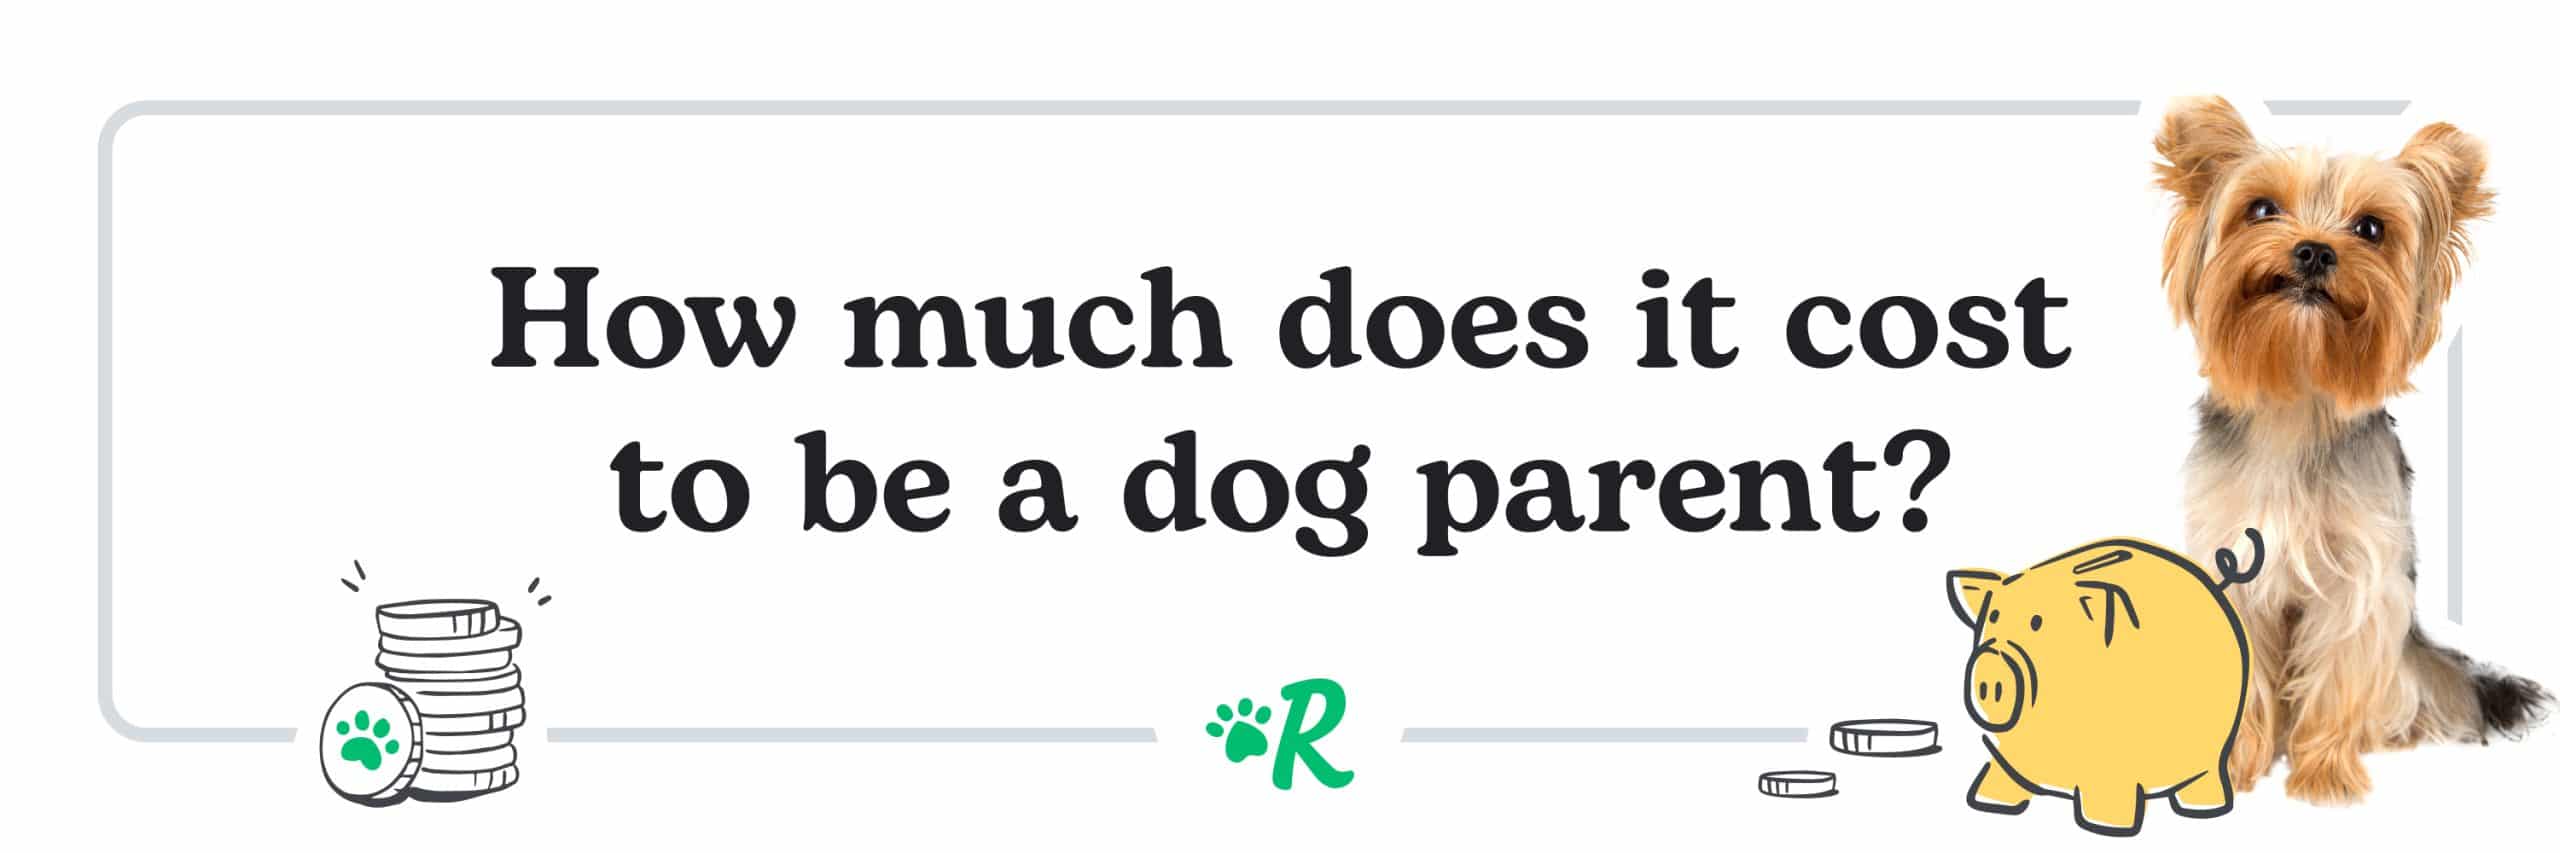 How much does it cost to be a dog parent?